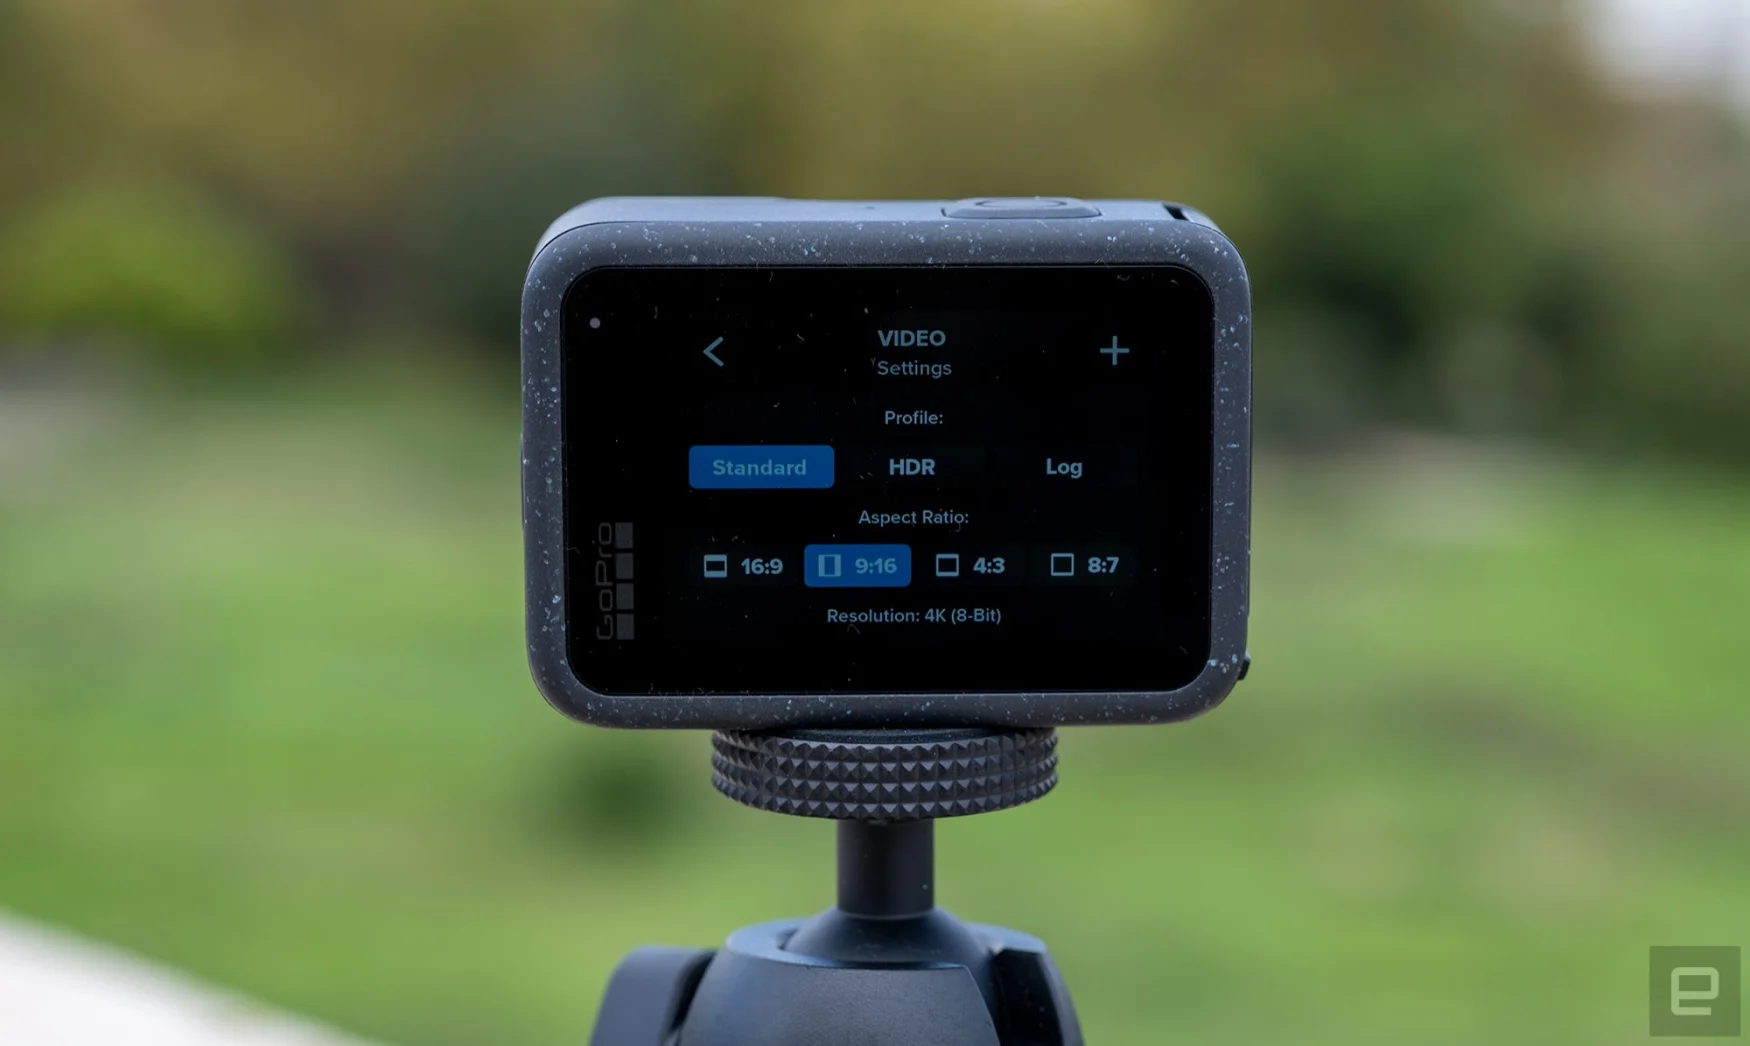 The vertical video settings page of the GoPro Hero 12 Black is shown.